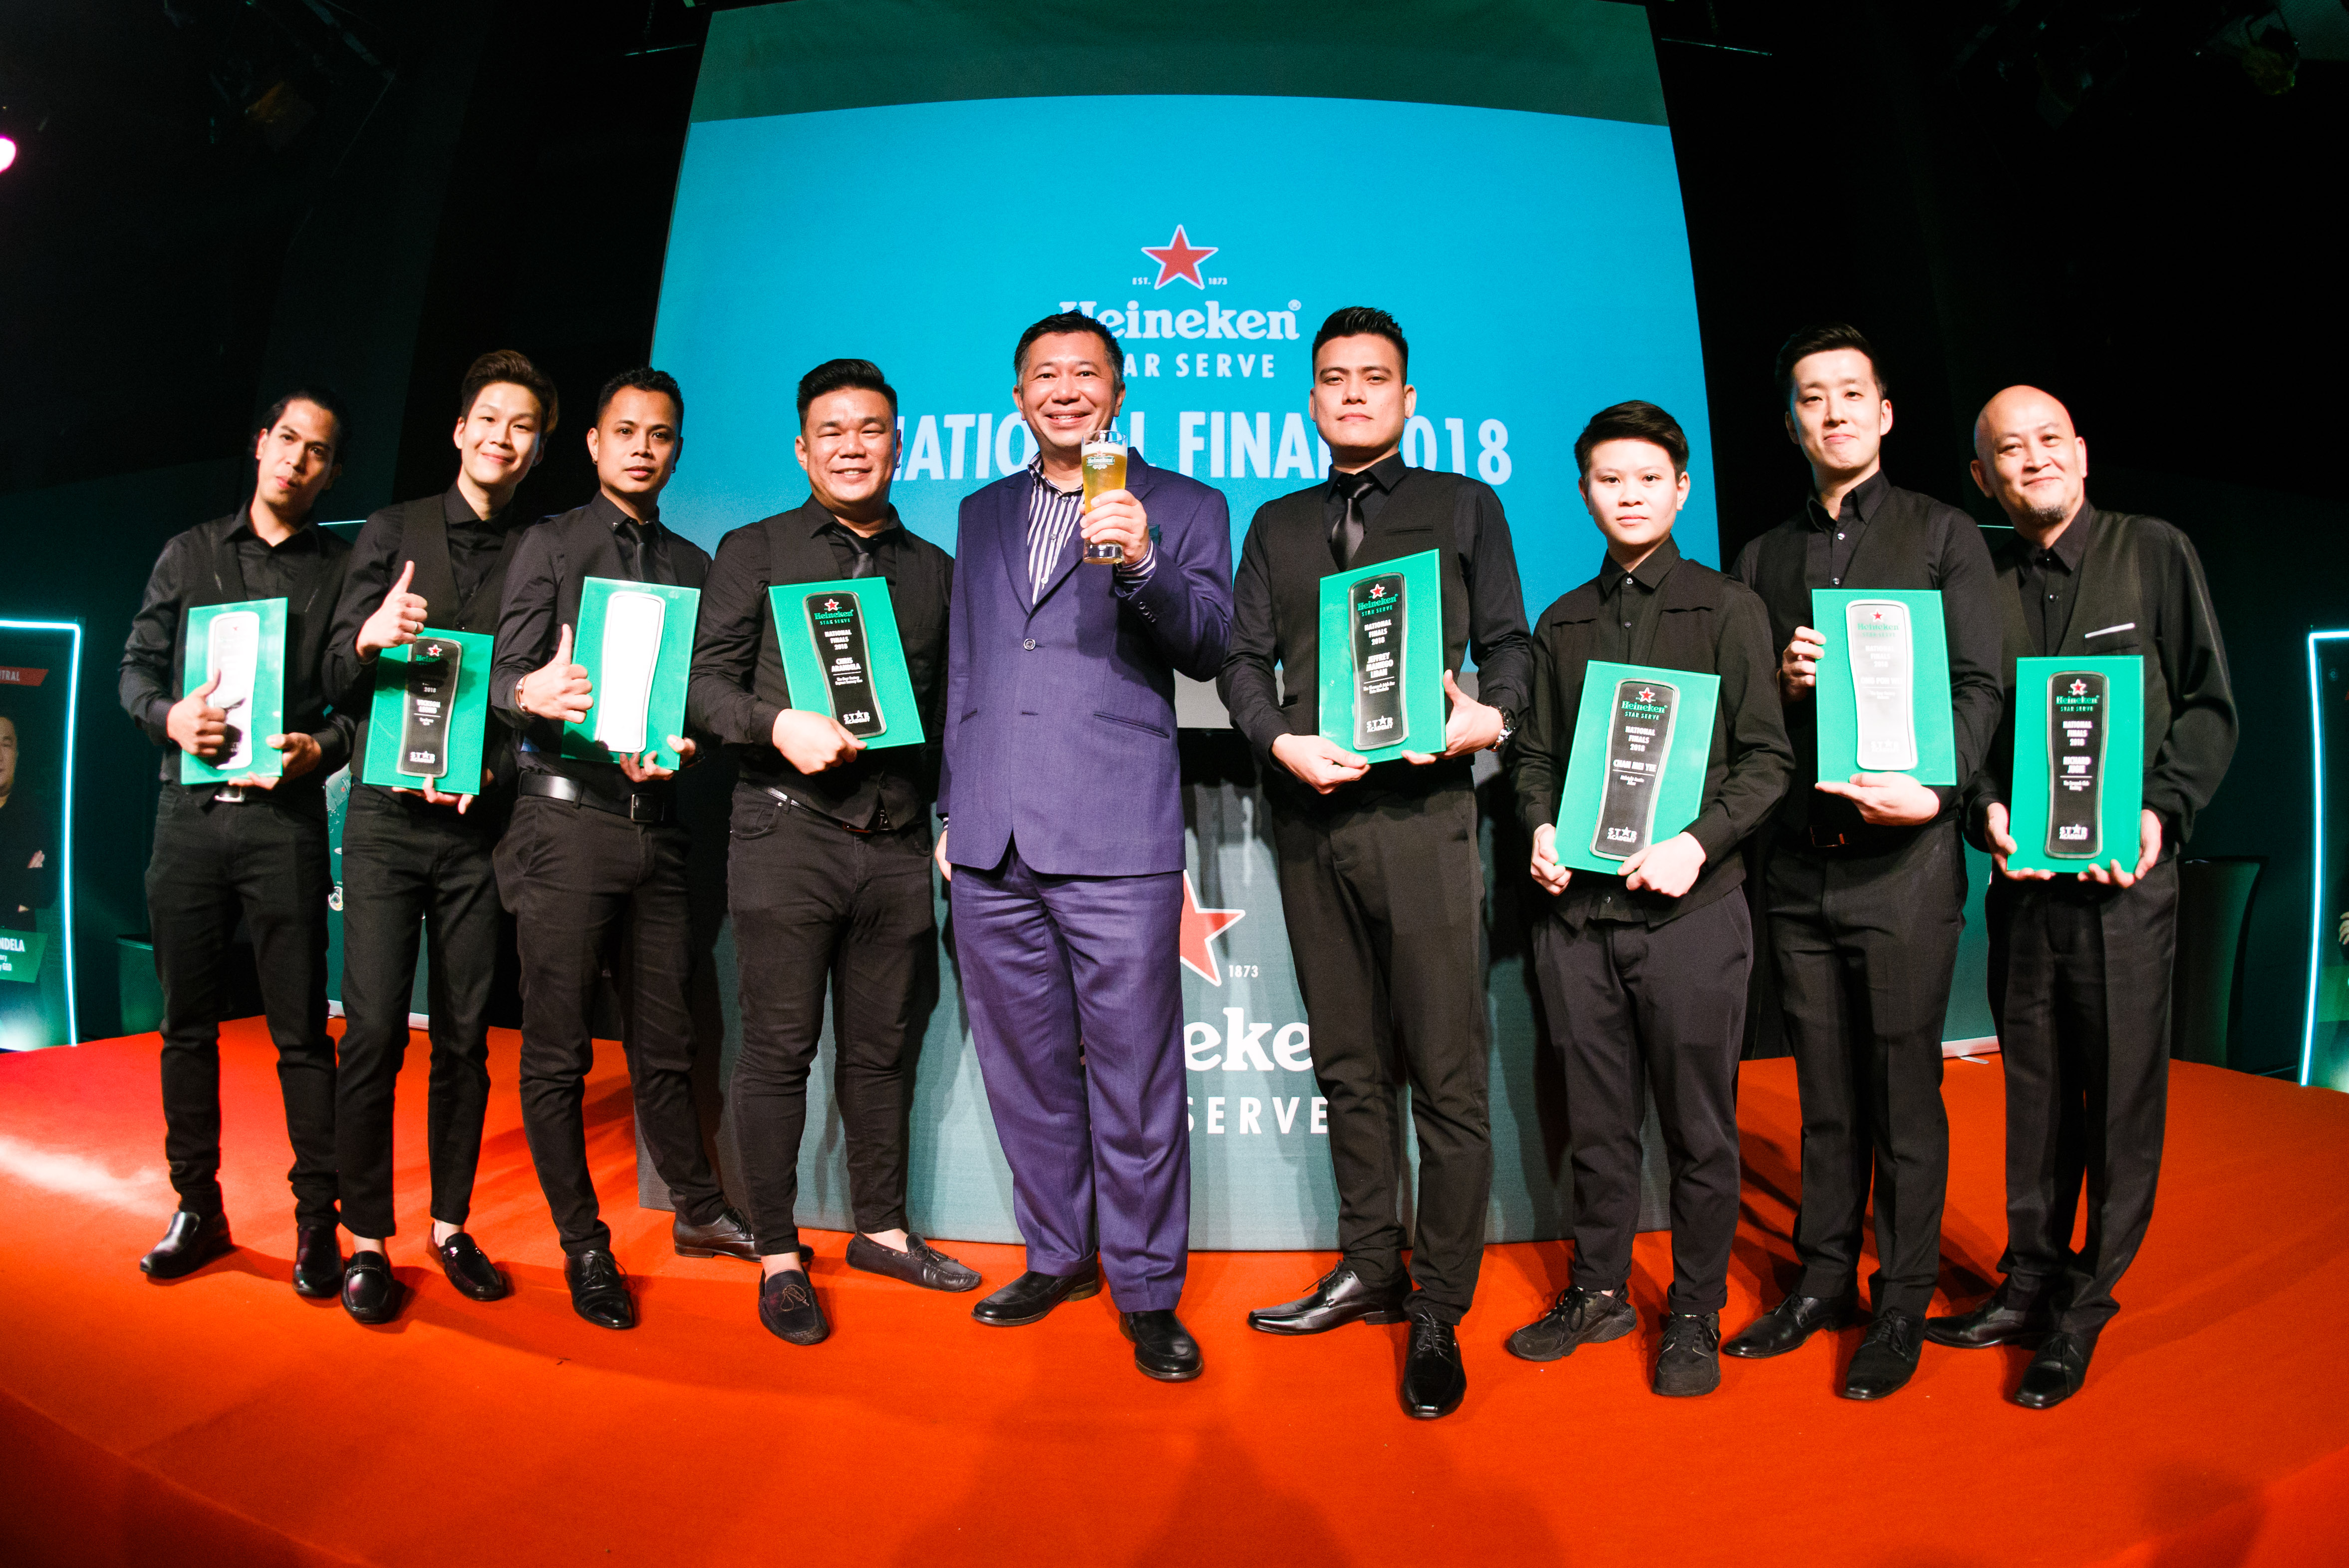 Mr. Andrew Woon, Sales Director of Heineken Malaysia Berhad, and the eight finalists during the Heineken Star Serve National Final 2018 event at Black Box, Publika